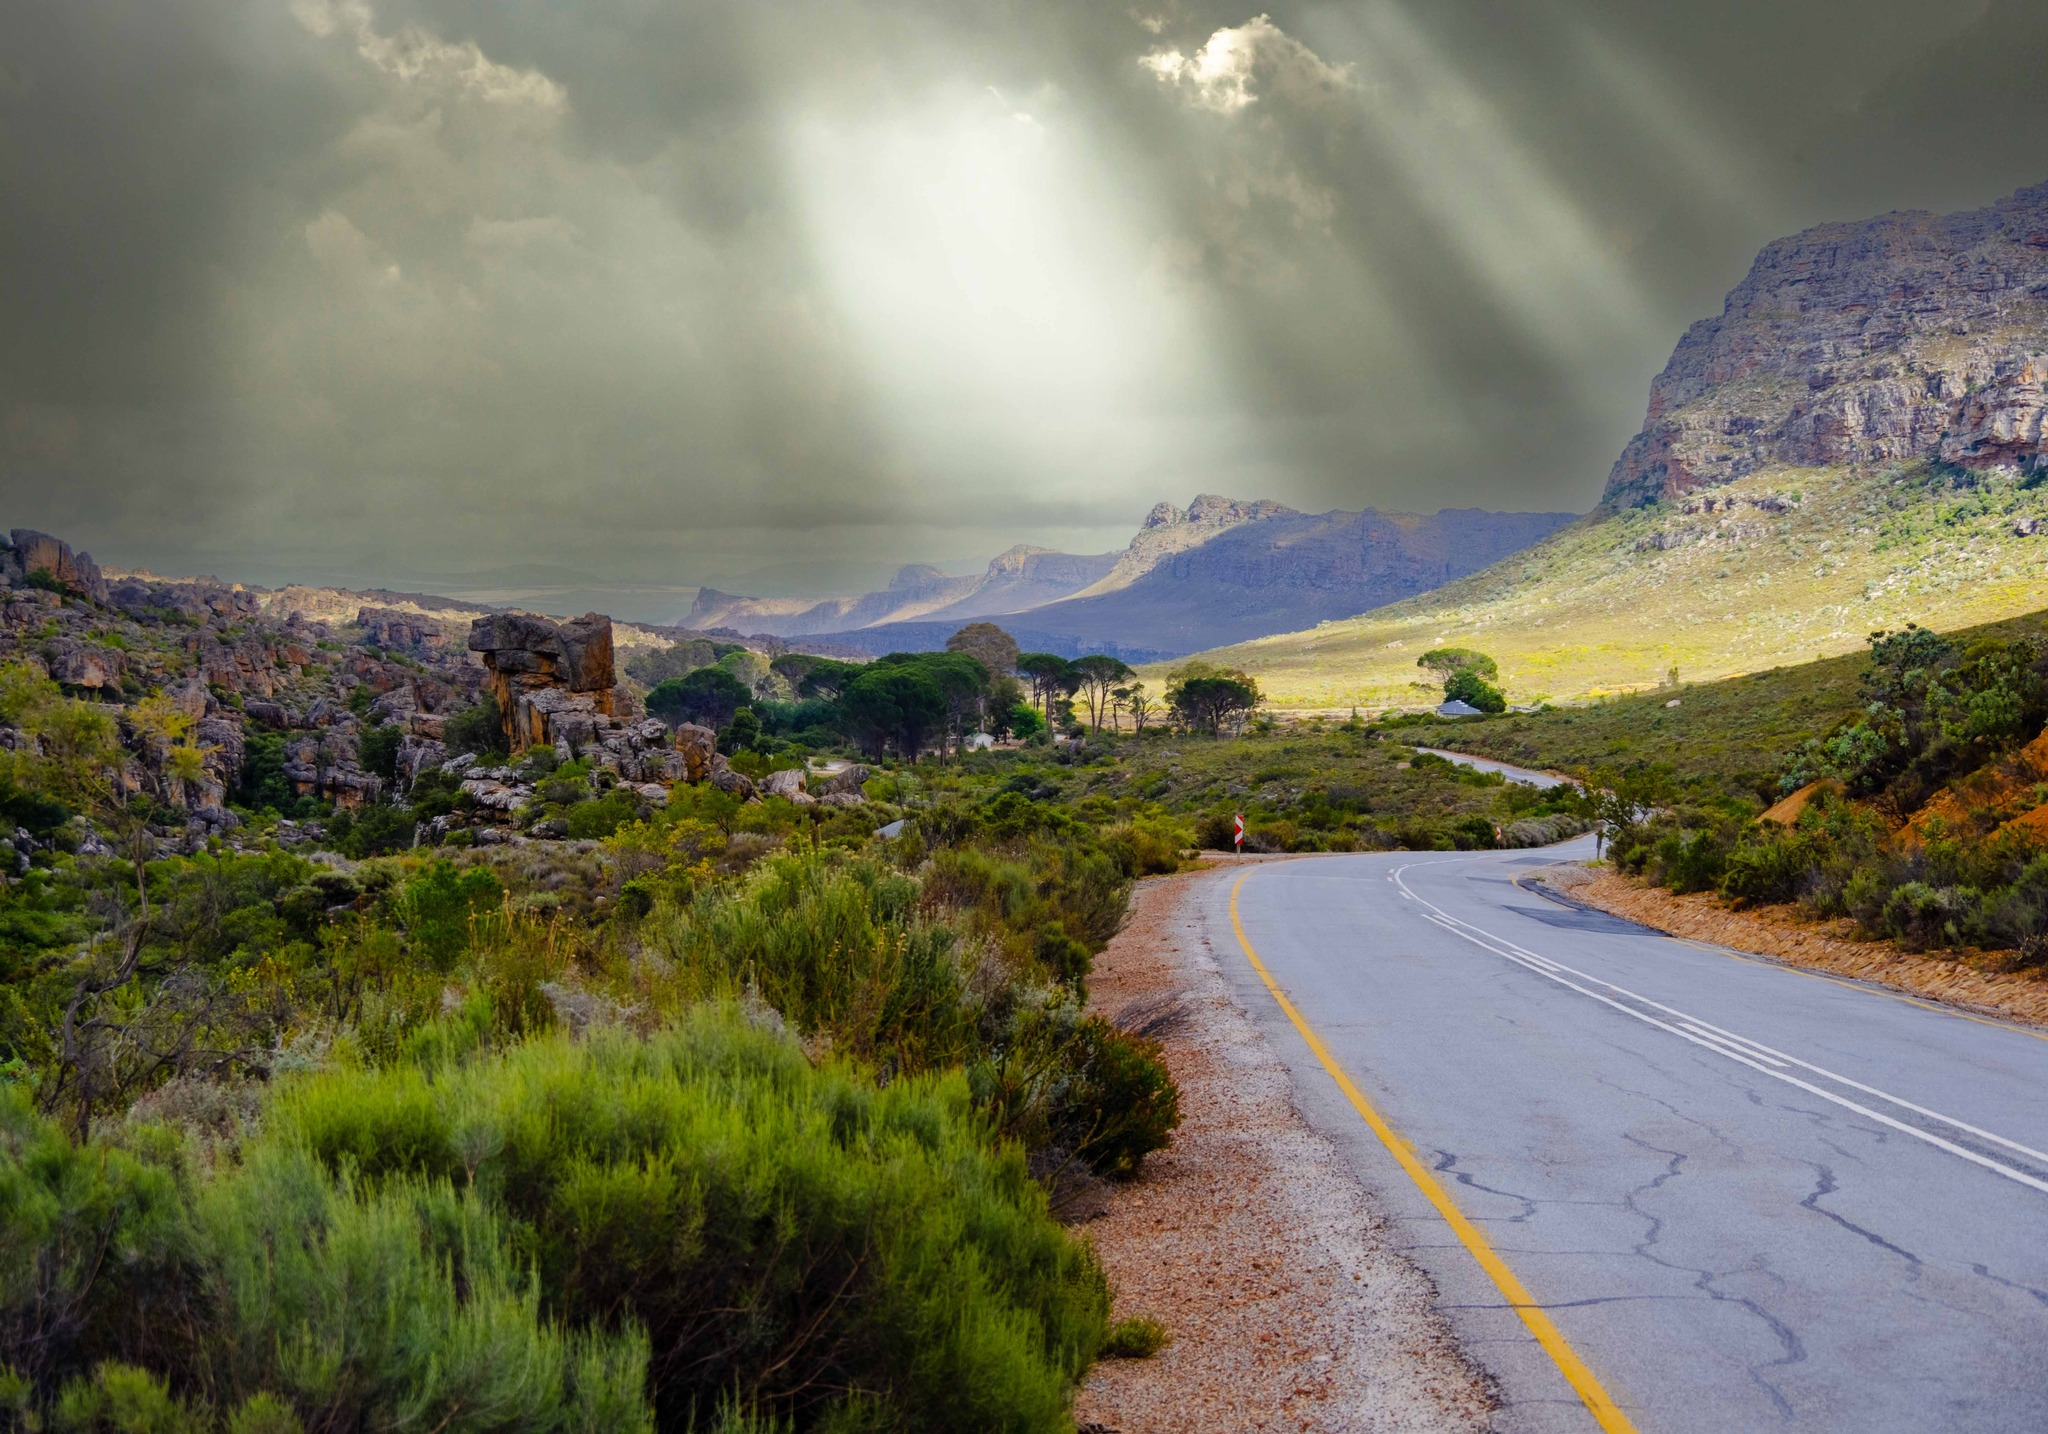 Cederberg Mountain Catchment Area from Doringbos South Africa